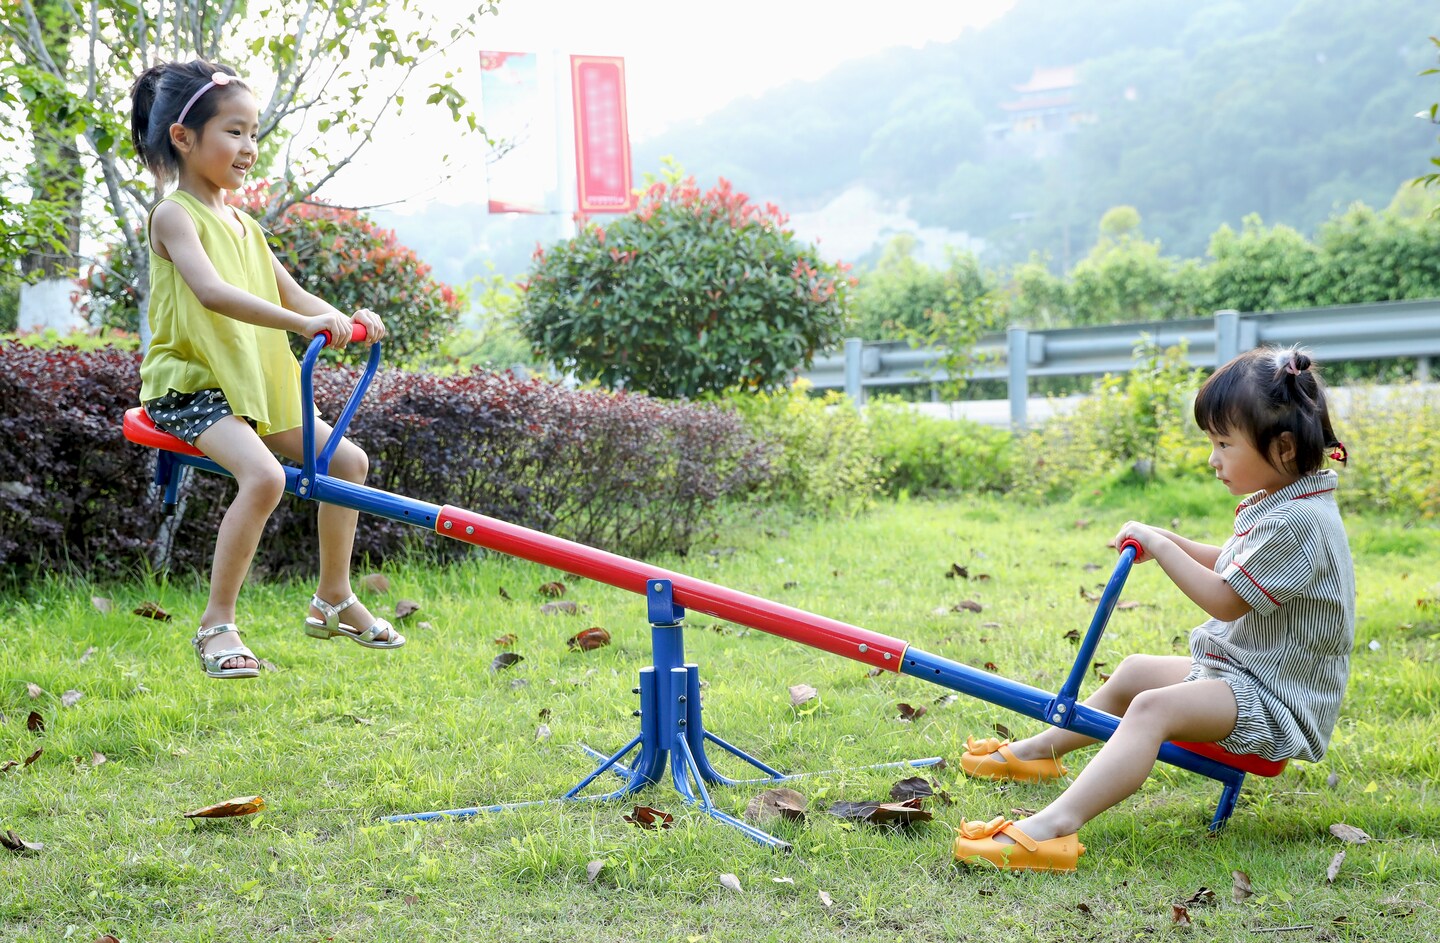 Outdoor Red and Blue Metal Rotating Seesaw